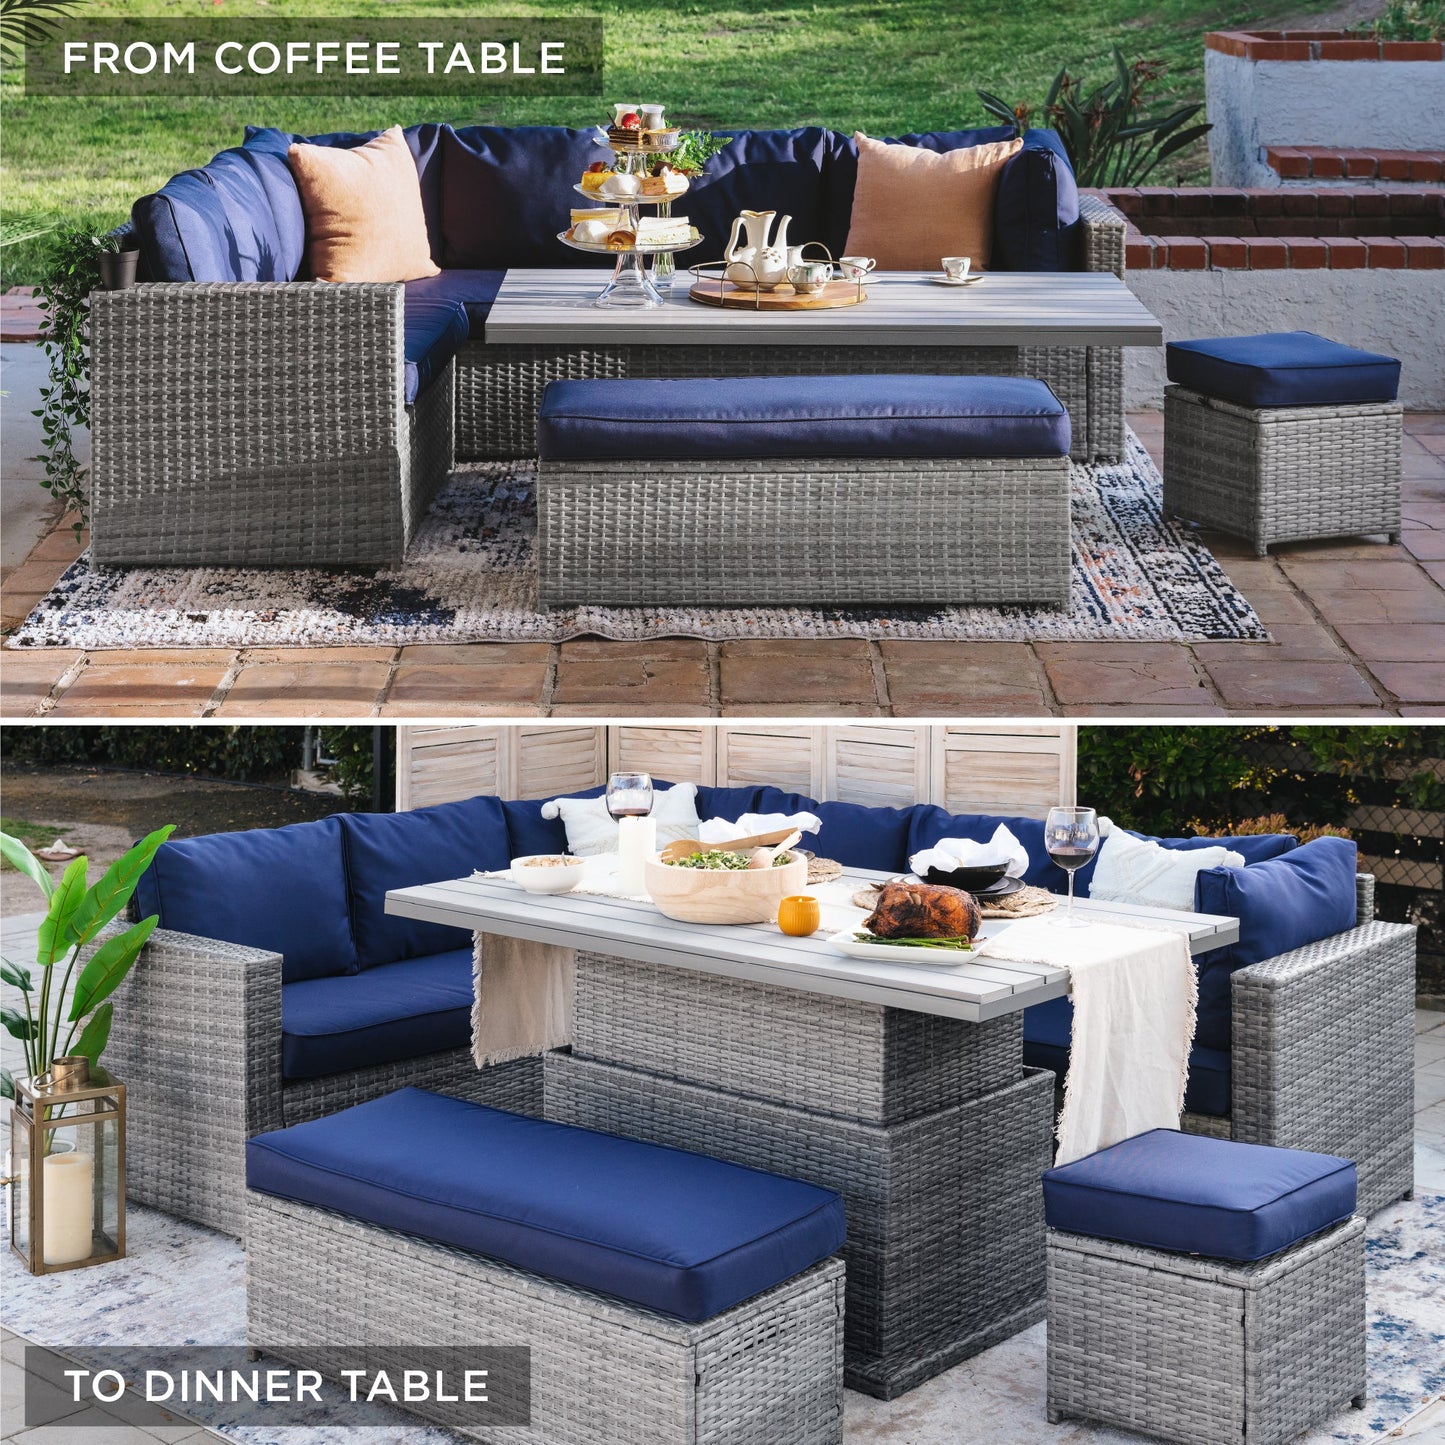 6-Piece Wicker Patio Furniture Set w/ Height-Adjustable Dining Table